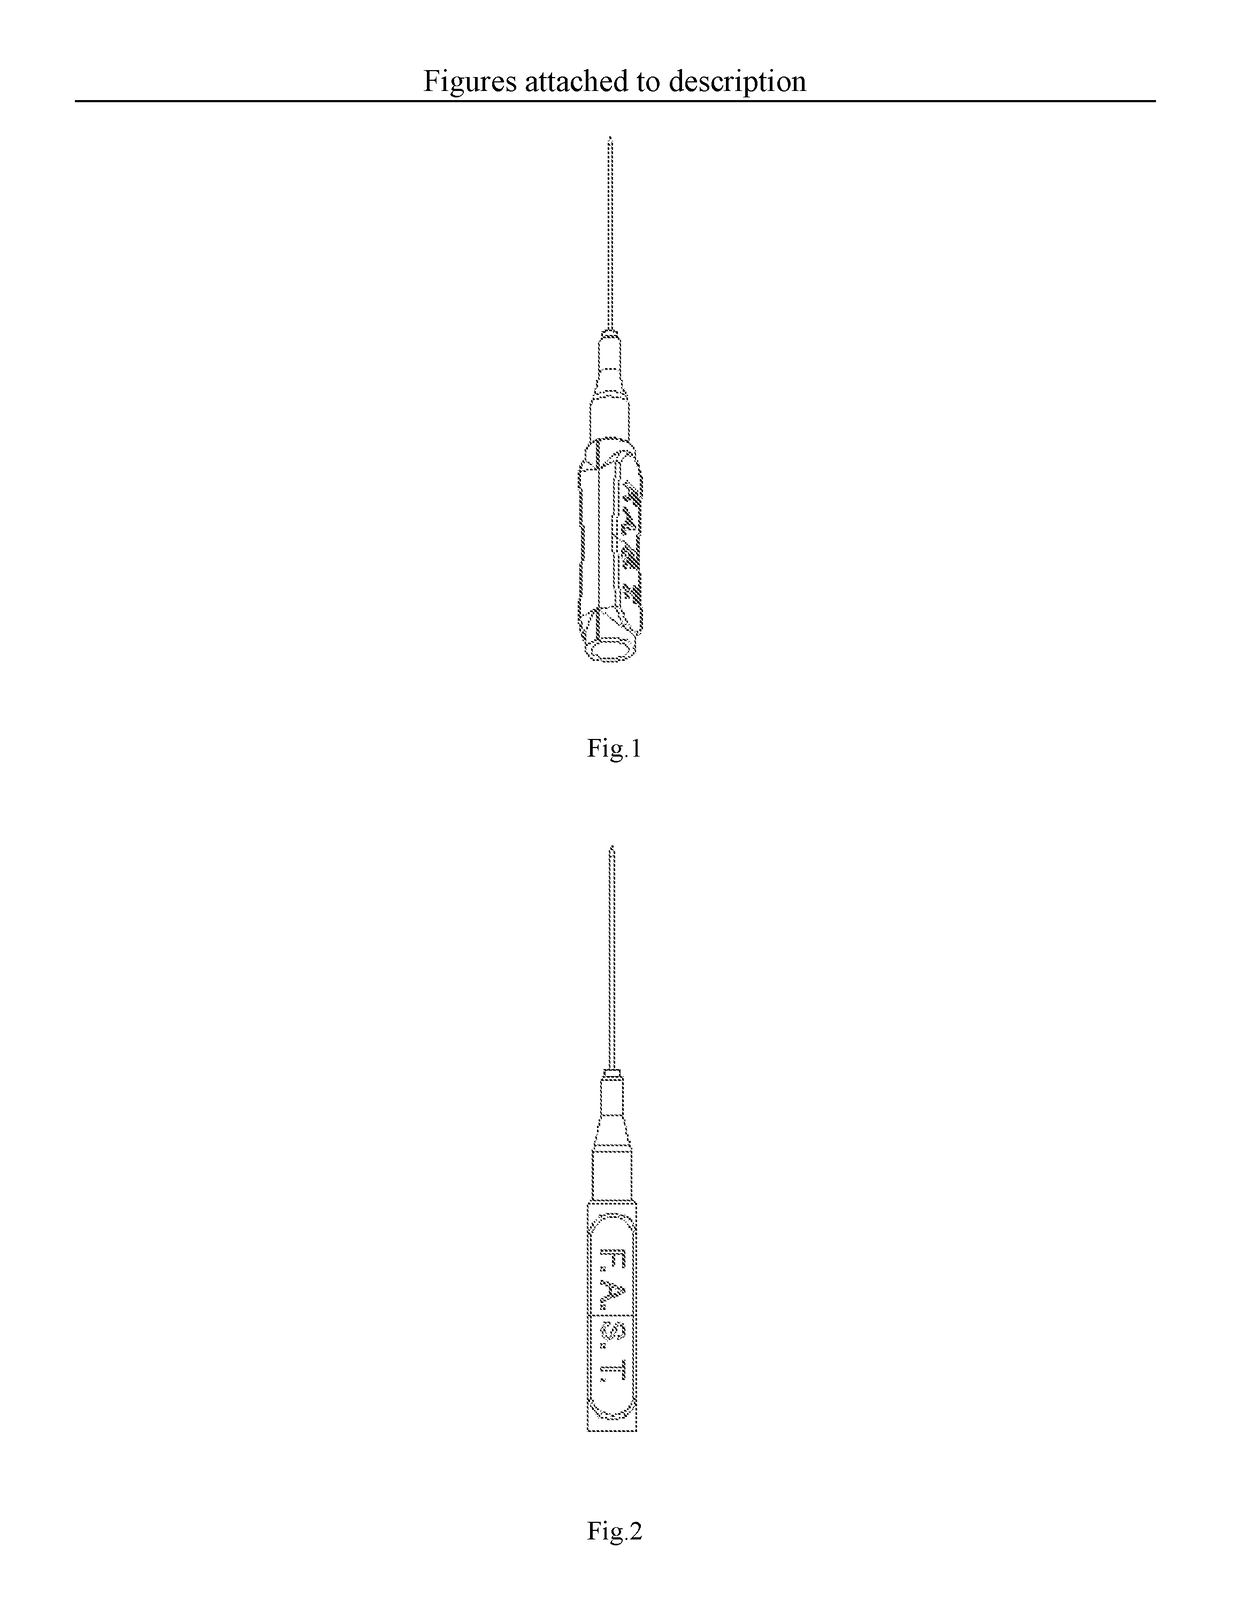 Type of acupuncture needle used for fsn